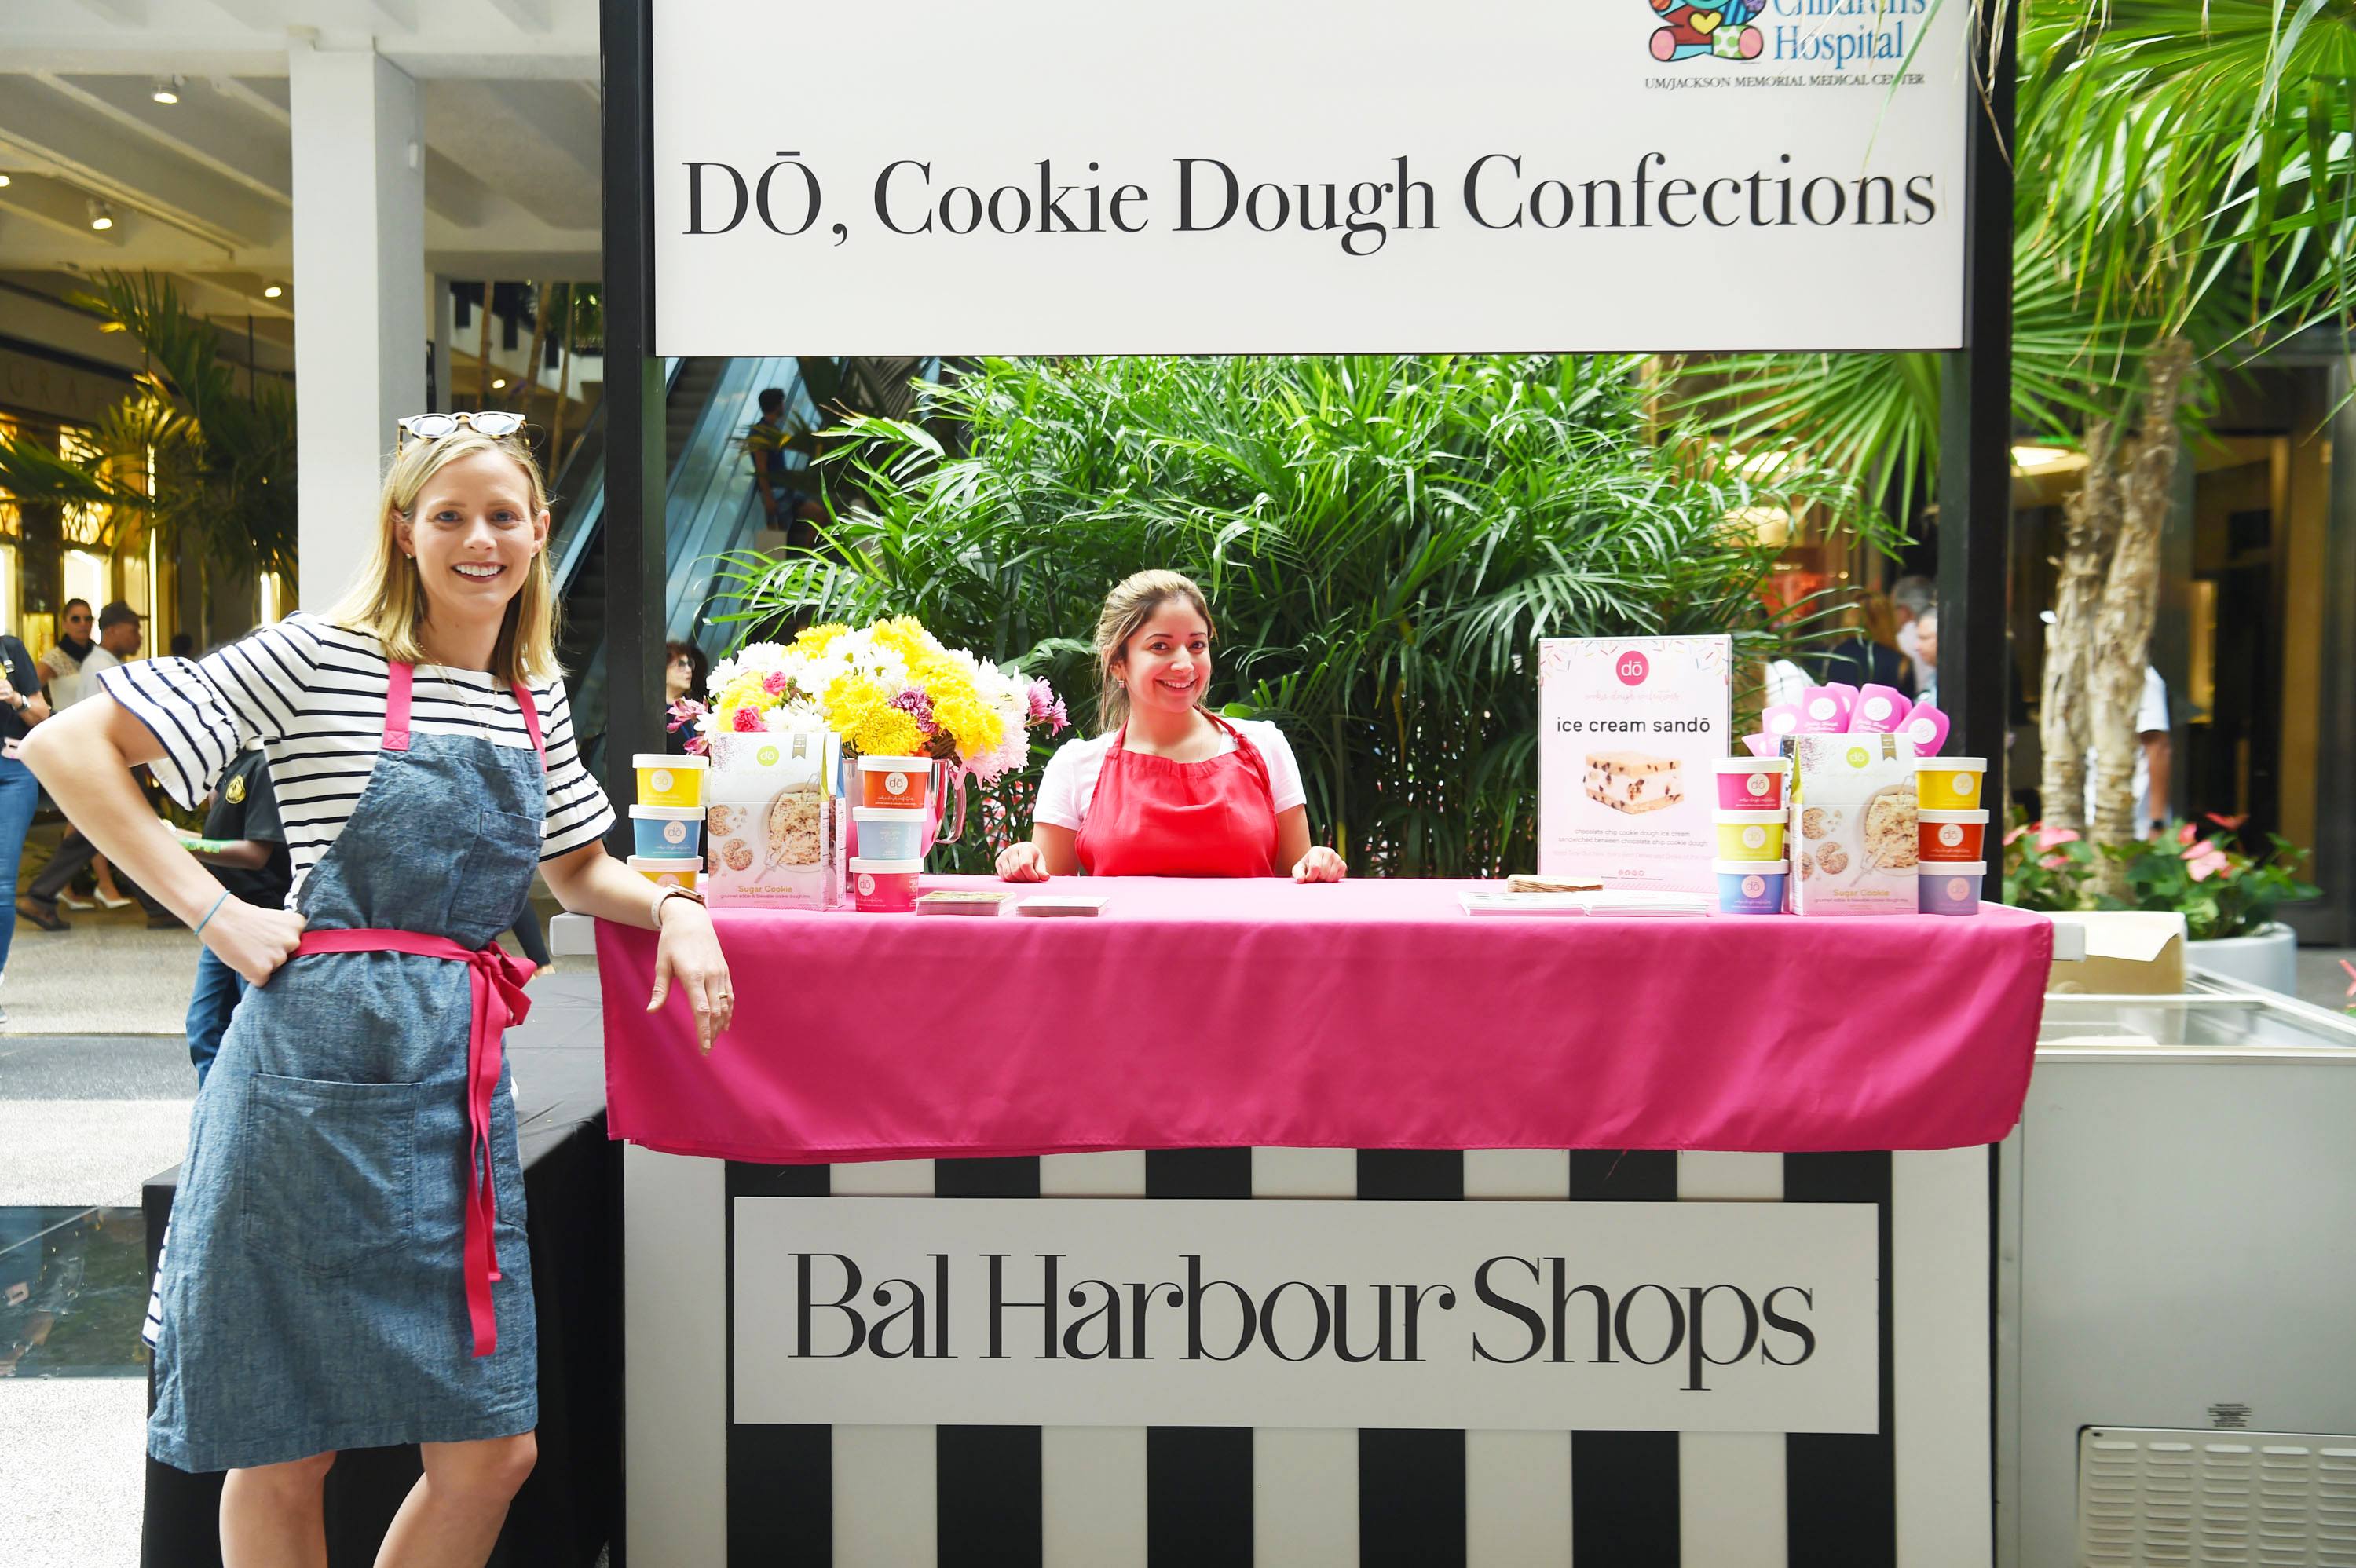 DŌ, Cookie Dough Confections featured their signature Ice Cream SanDŌwich throughout both days of the event